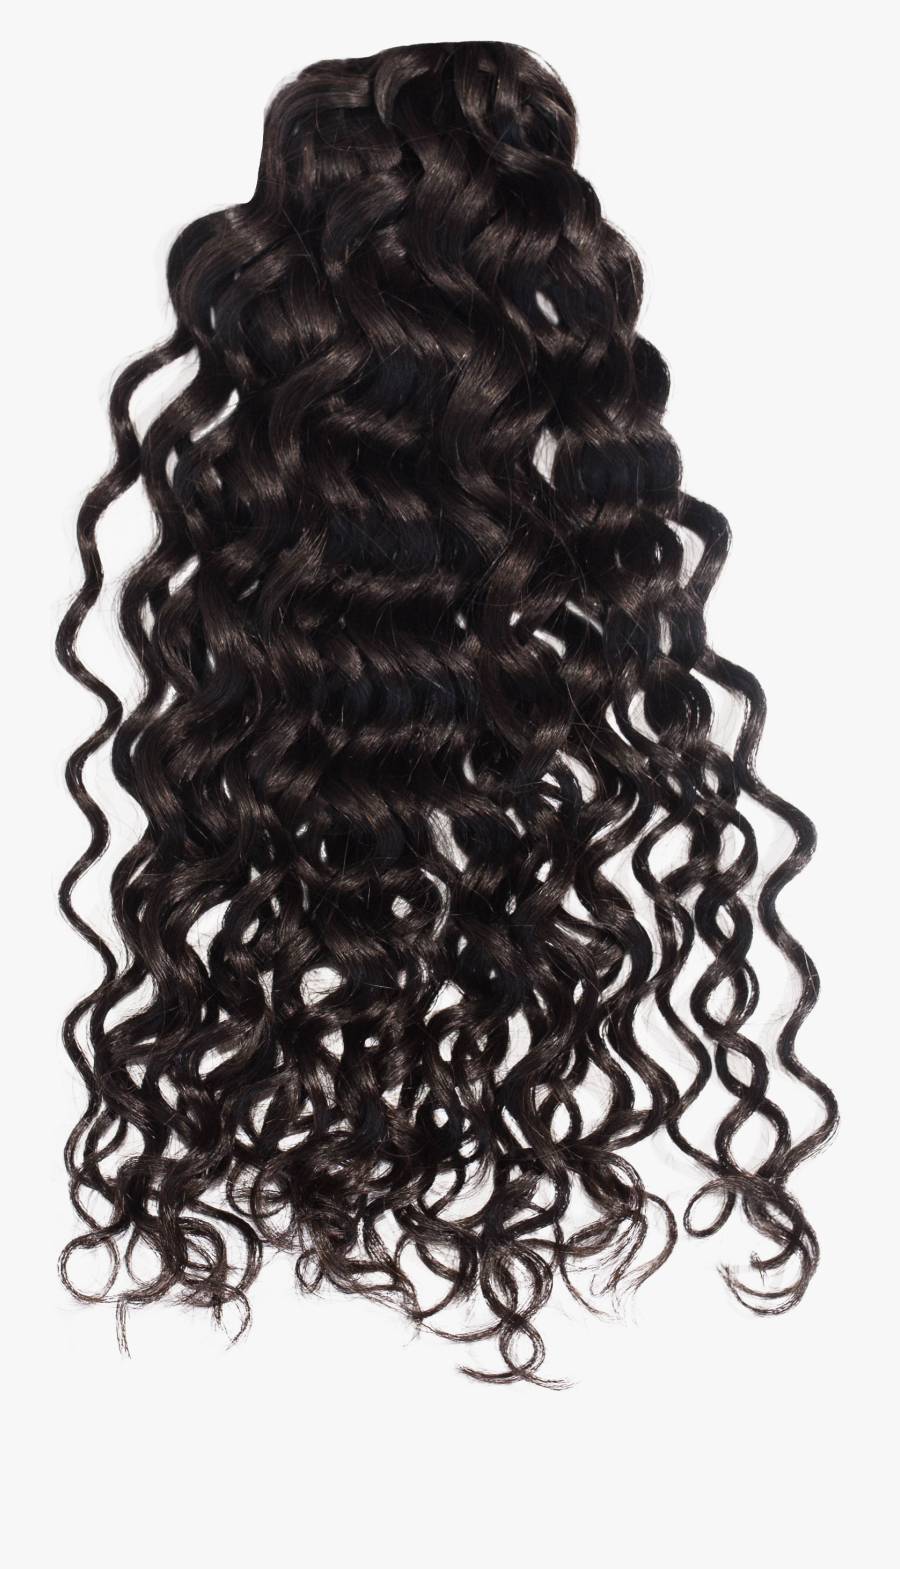 Tumblr Liked On Polyvore - Black Curly Hair Png, Transparent Clipart